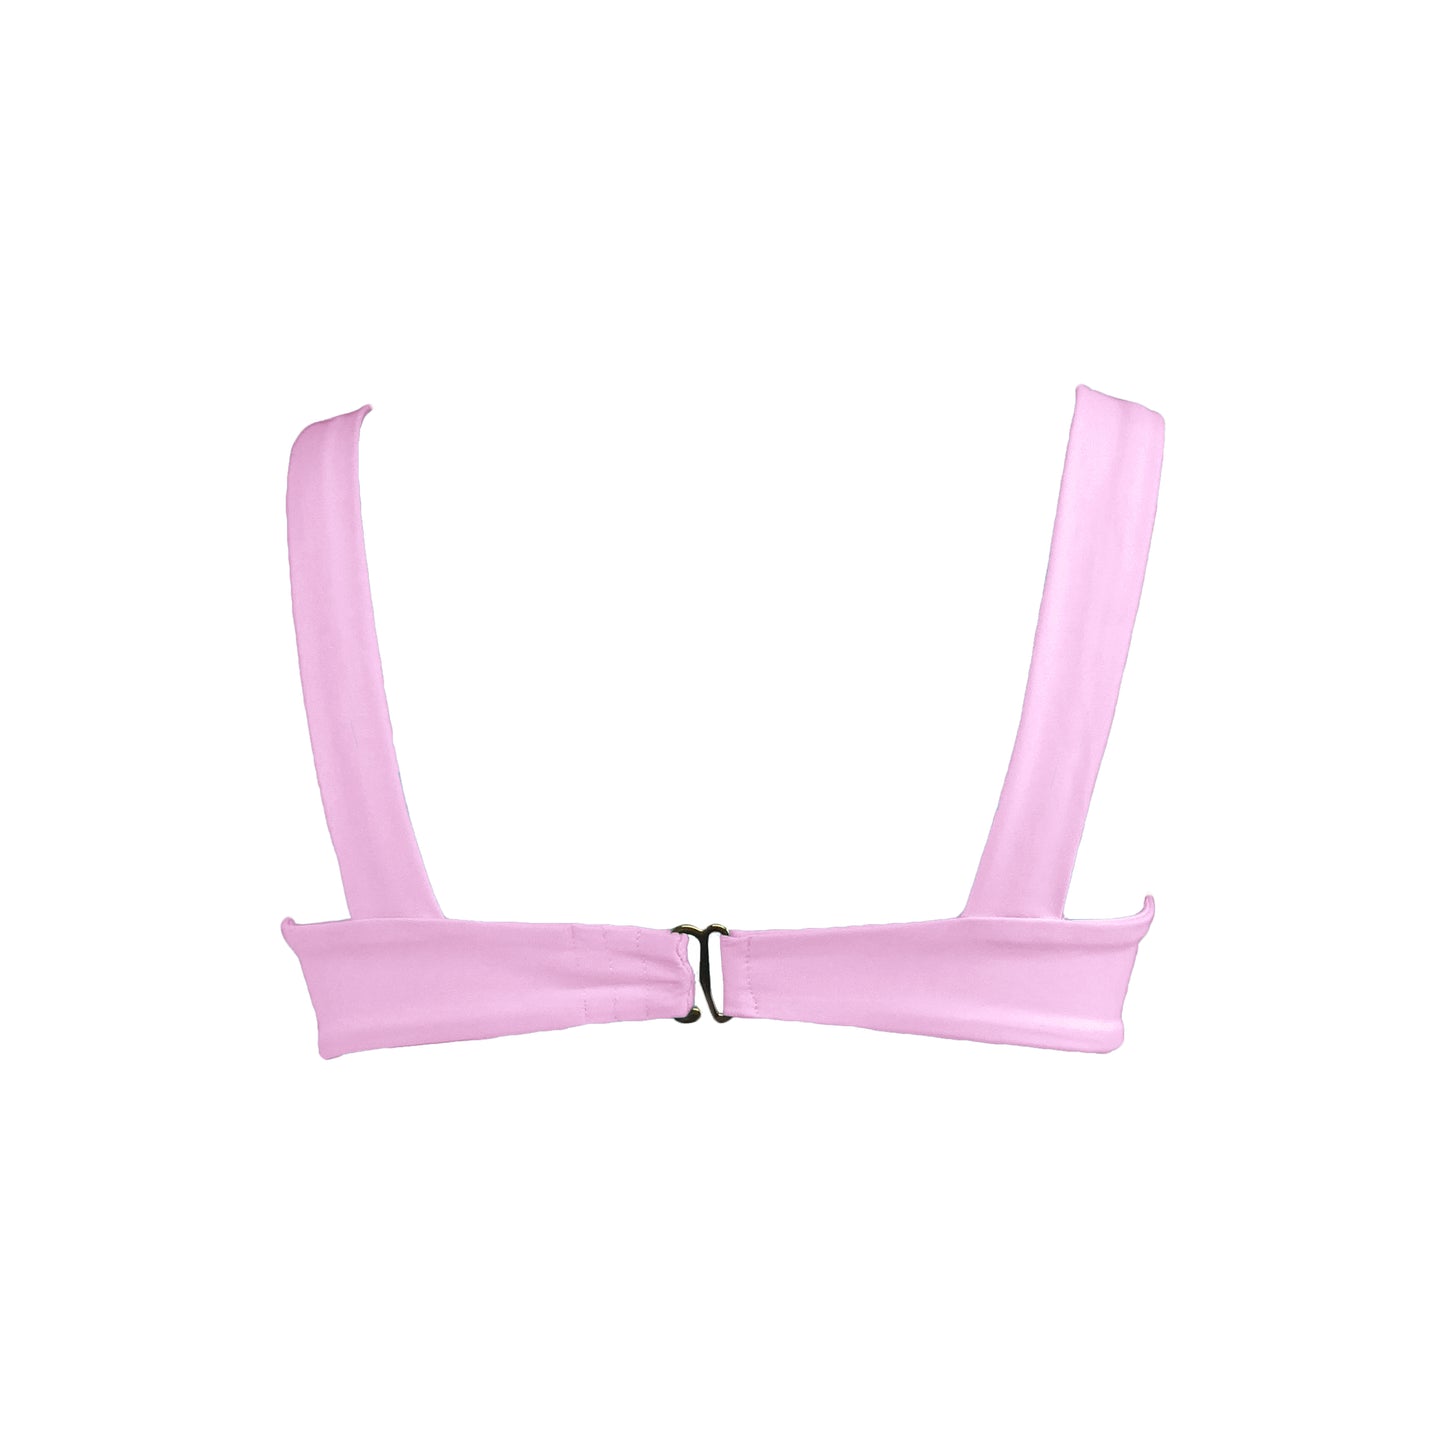 Back view astel pink straight neck, underwire bikini top with wide shoulder straps and back hook closure.